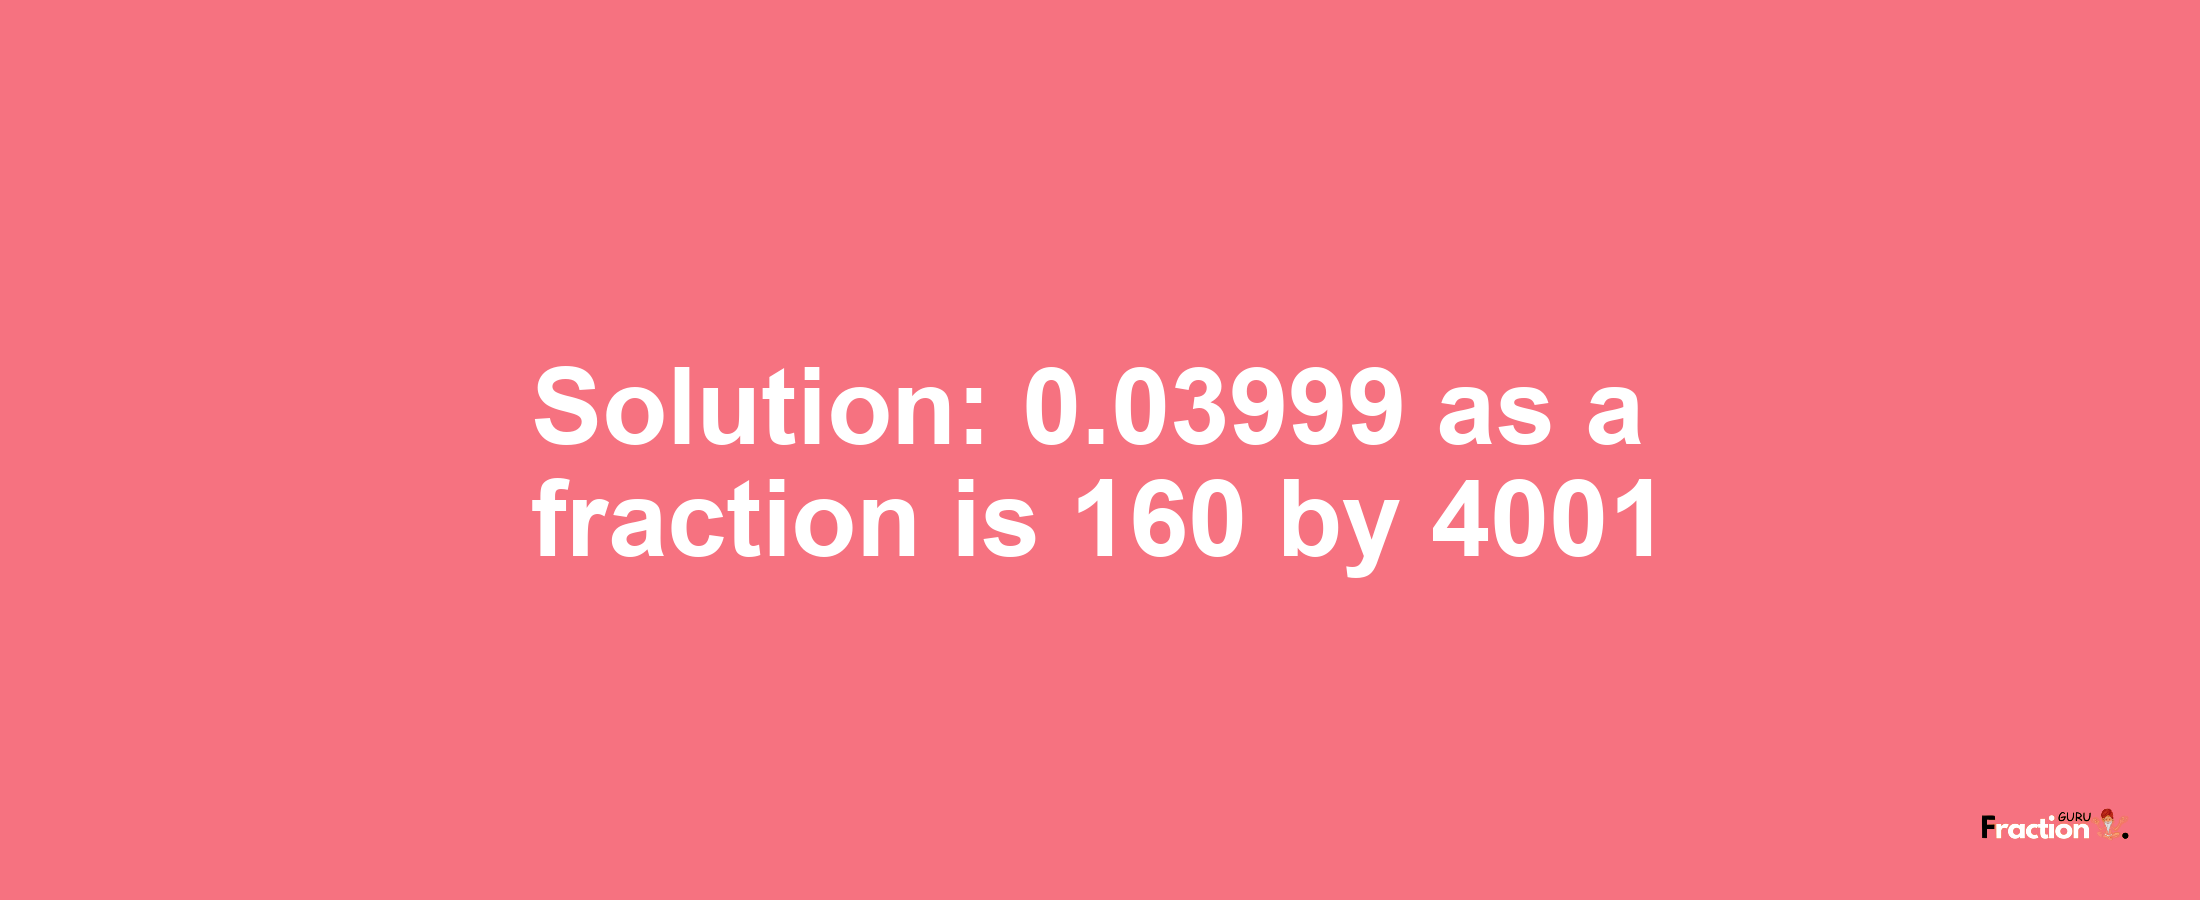 Solution:0.03999 as a fraction is 160/4001